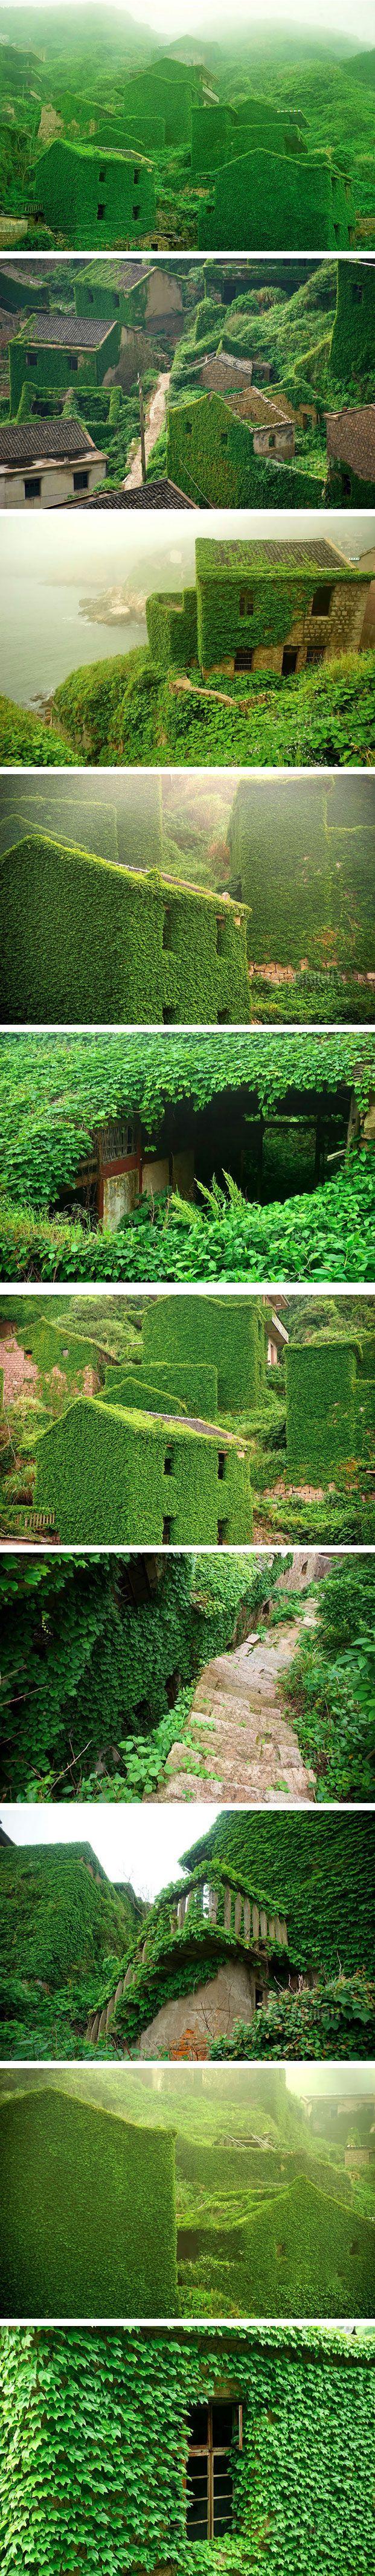 Wedding - Photographer Captures Amazing Images Of An Abandoned Chinese Fishing Village Being Reclaimed By Nature